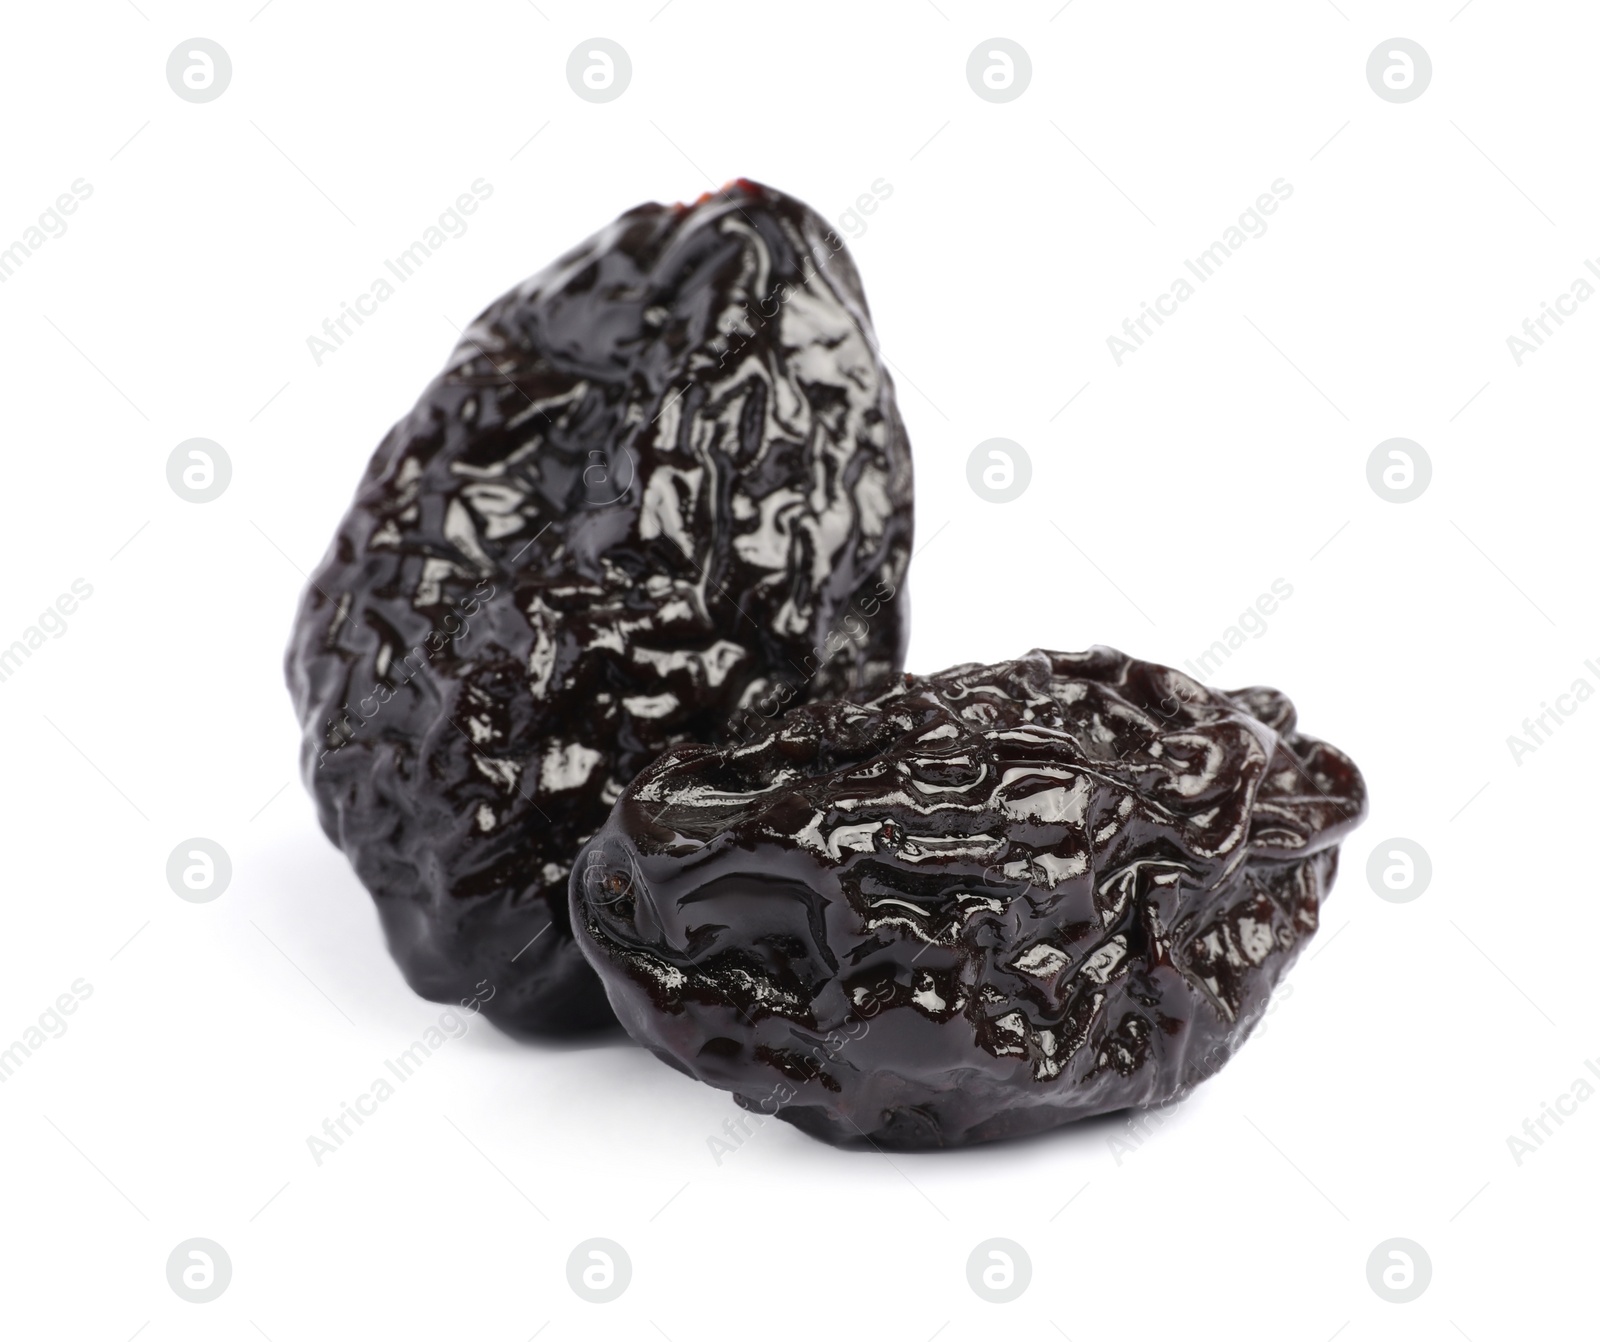 Photo of Sweet dried prunes on white background. Healthy snack